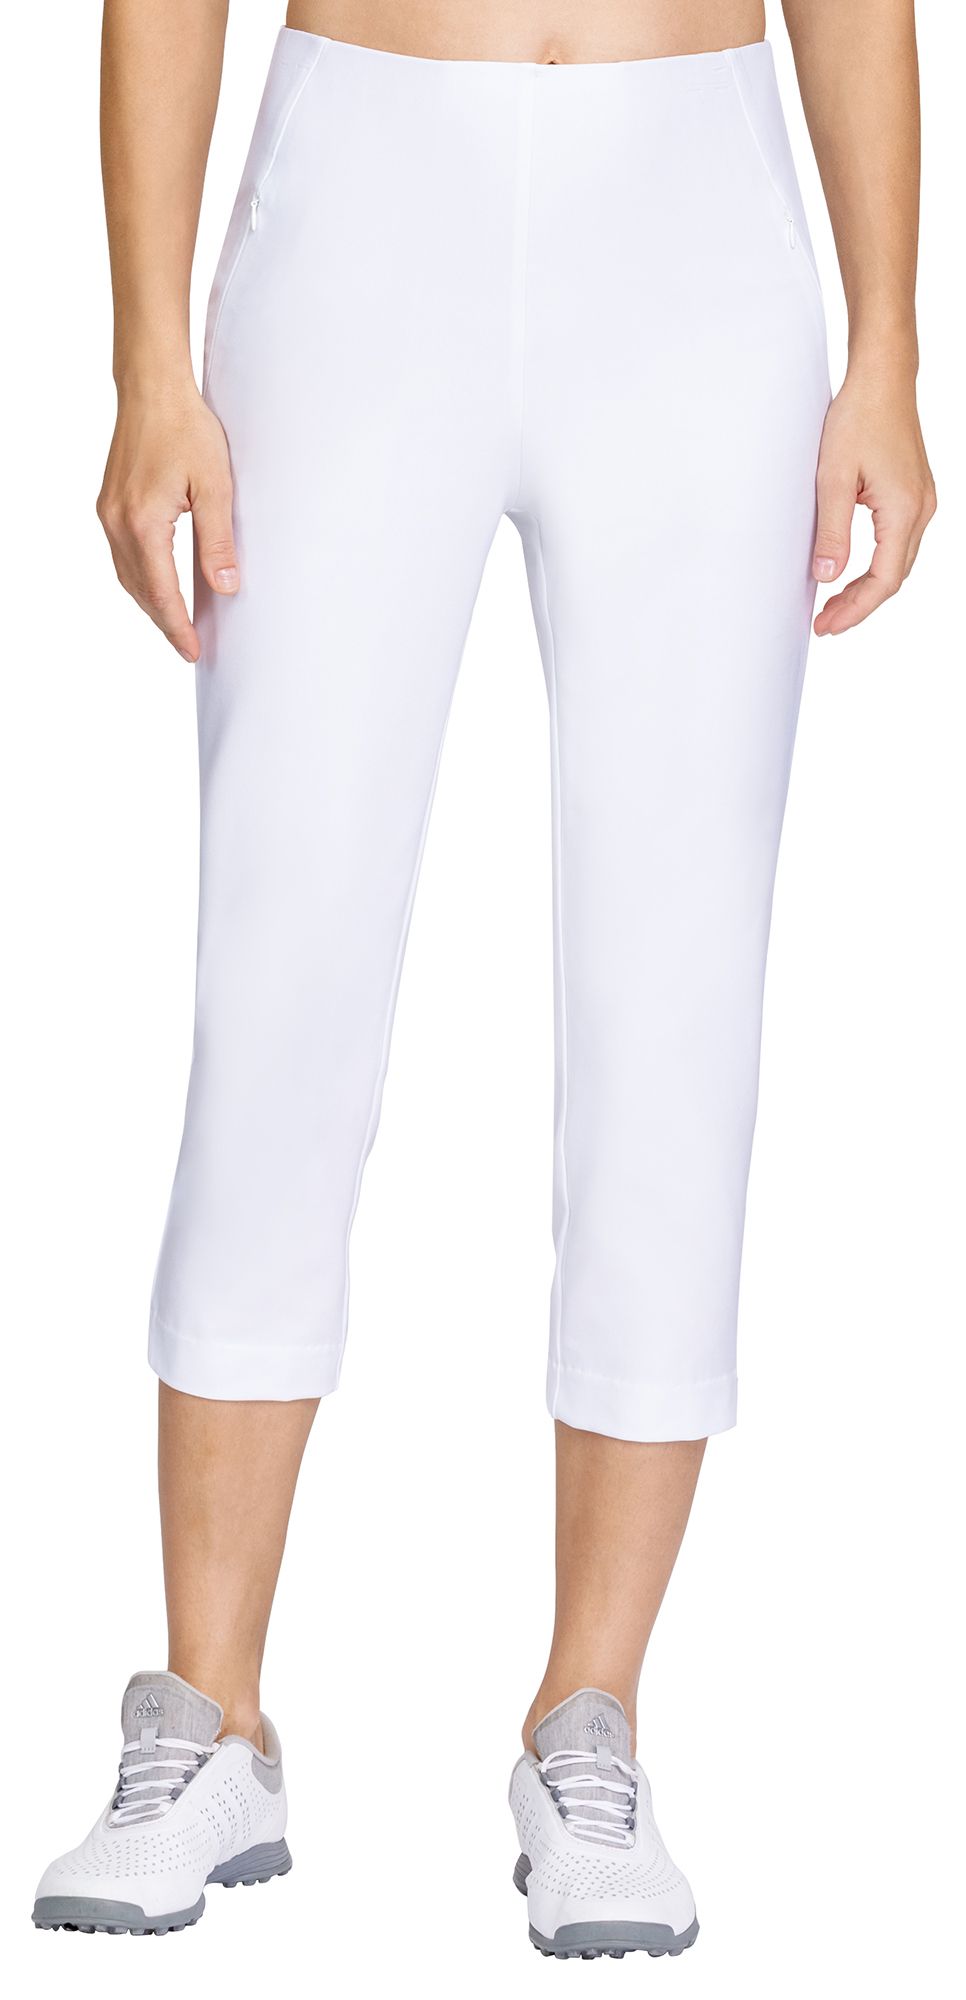 Tail Women's Classic 31” Tailored Golf Pants